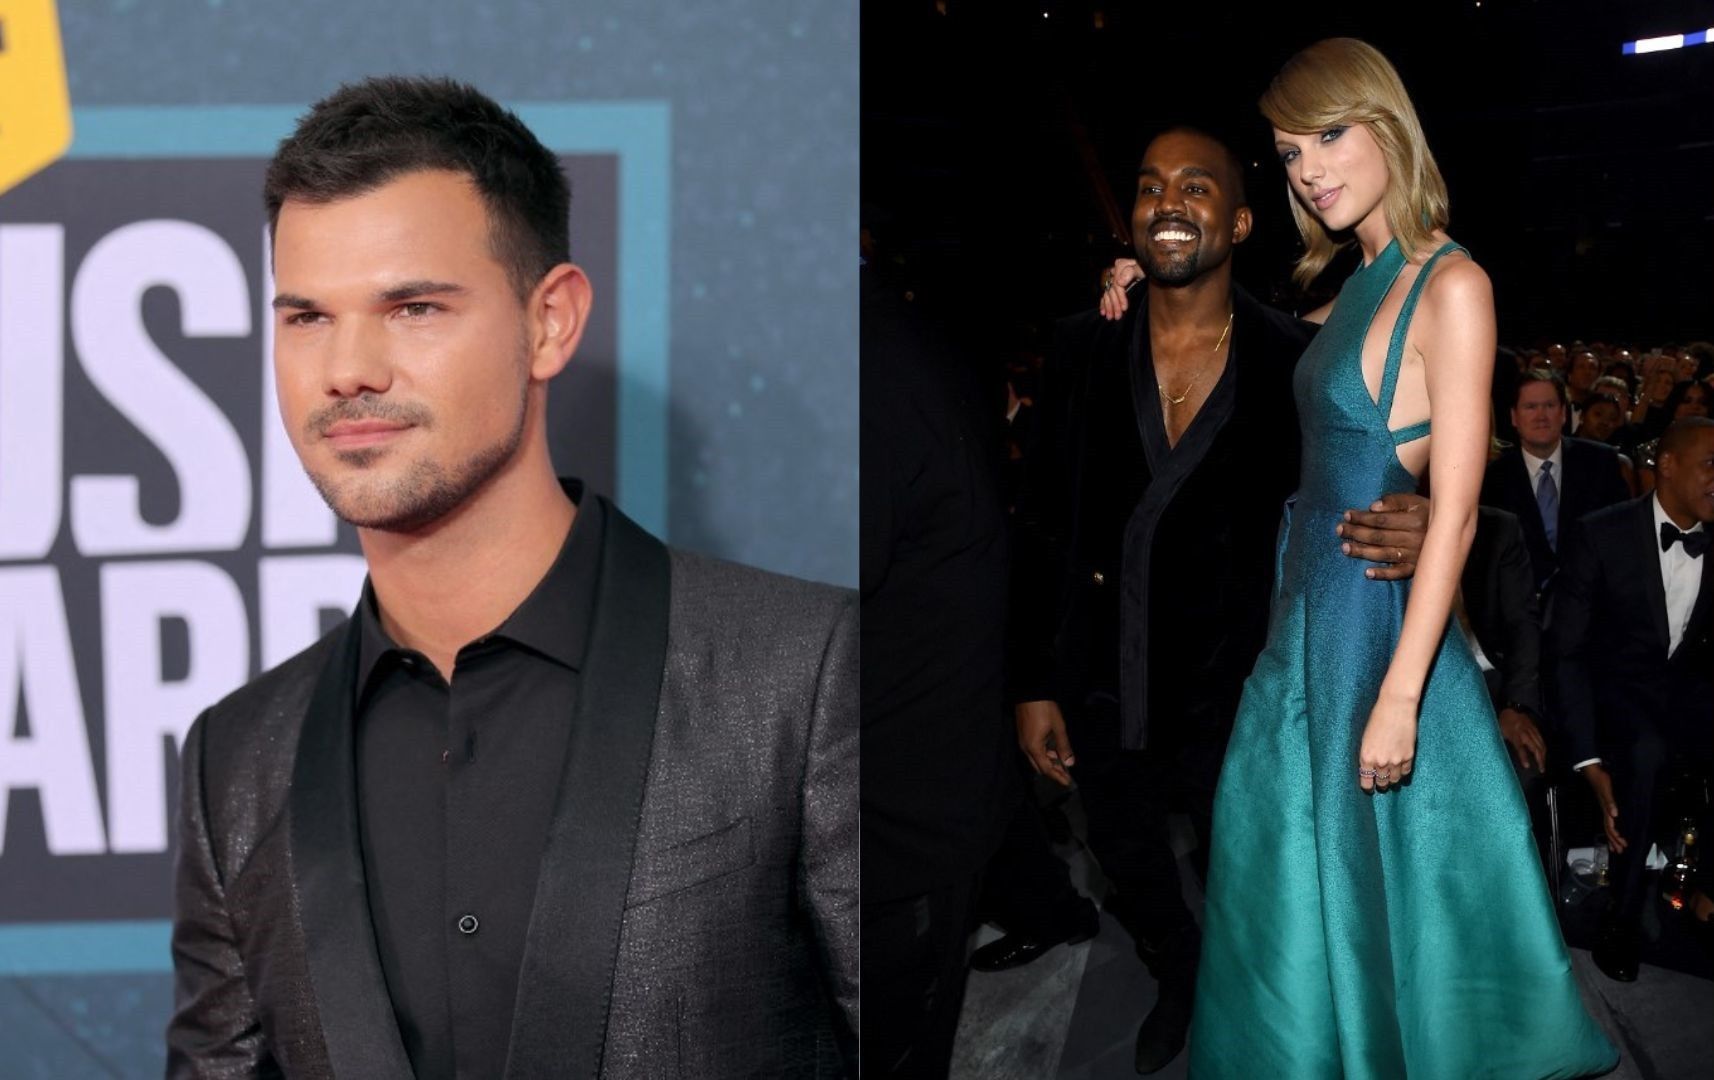 Taylor Lautner reflects on Kanye West, Taylor Swift 2009 VMAs incident